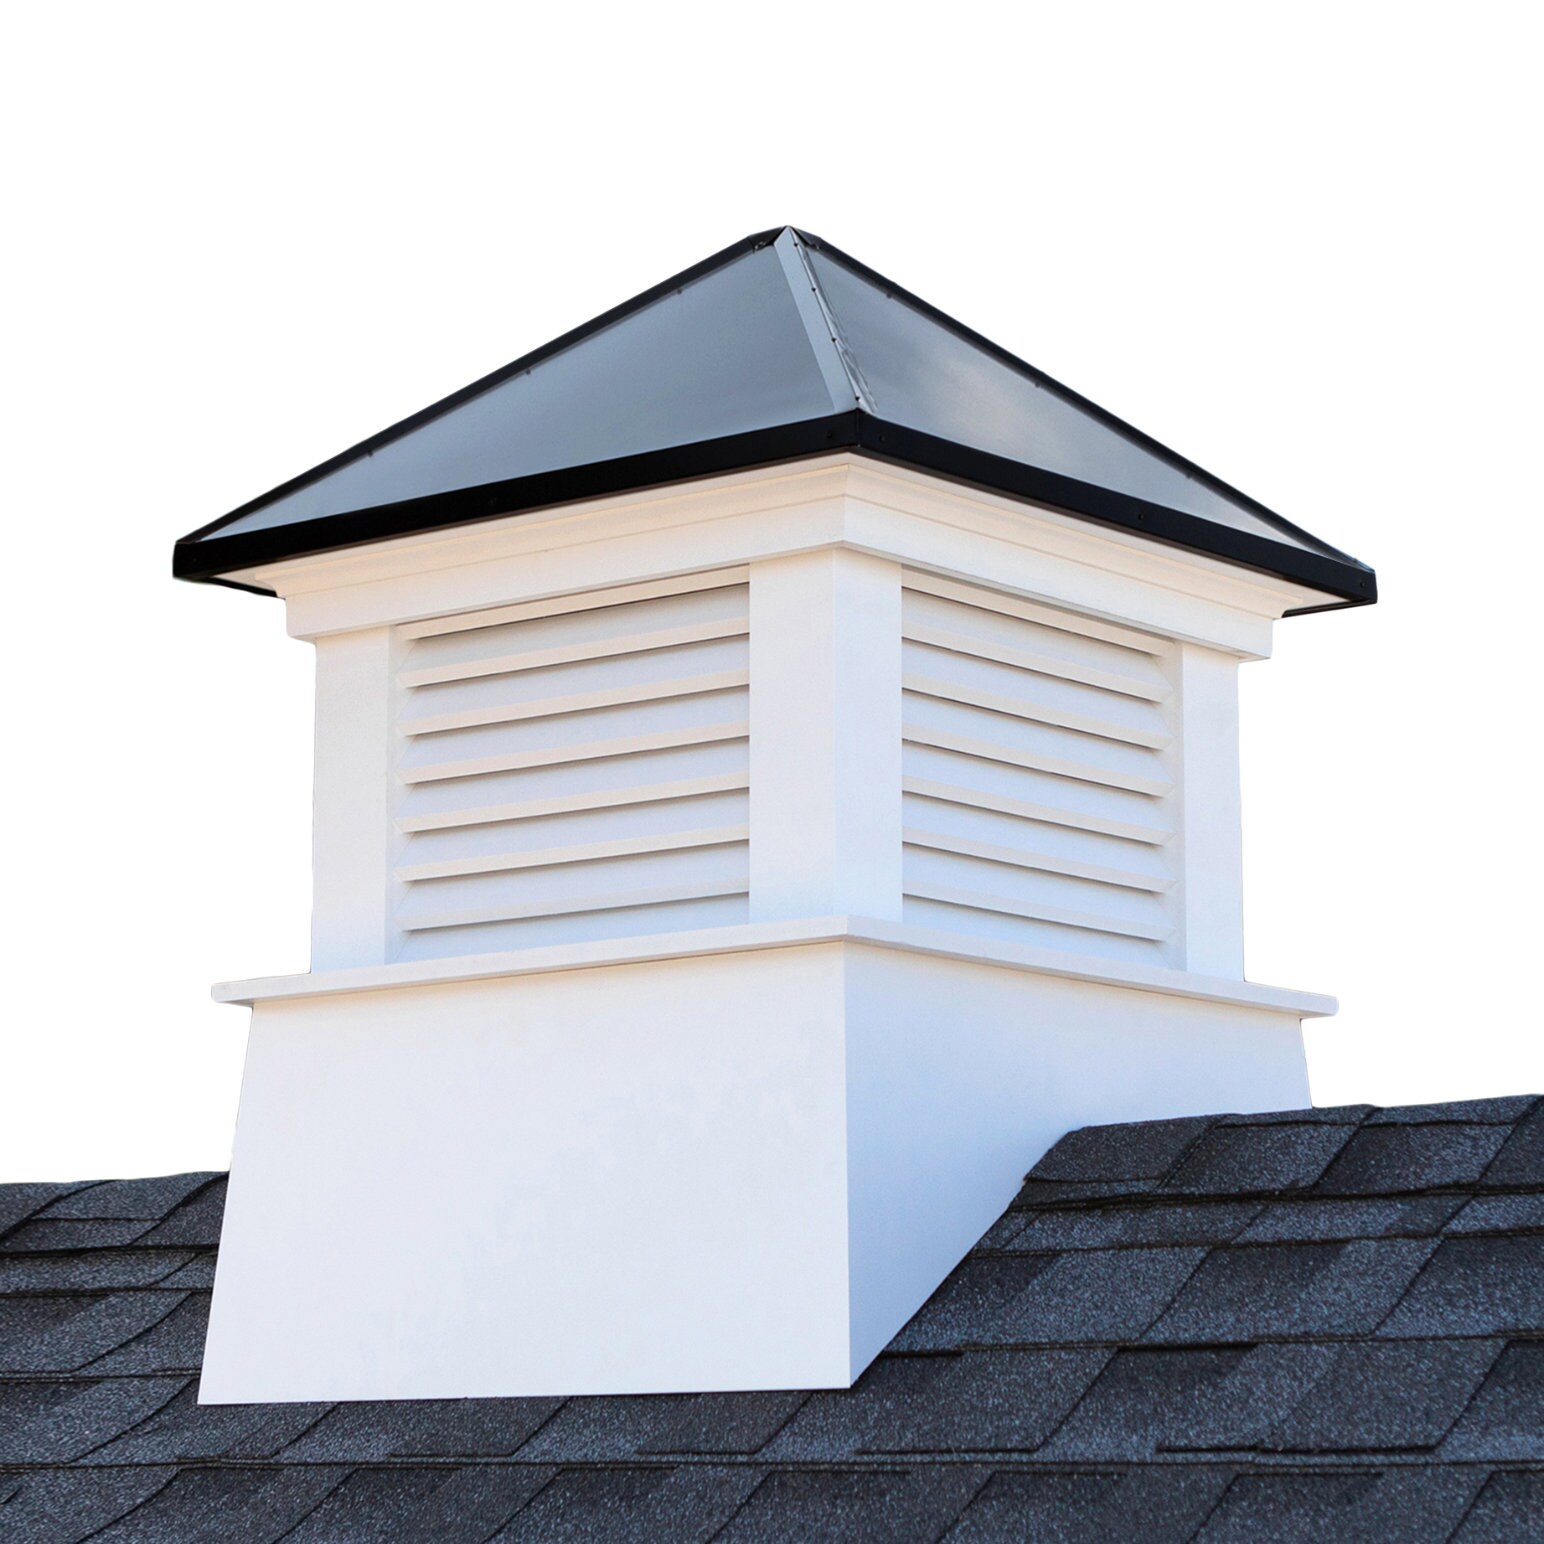 Manchester Vinyl Cupola with Black Aluminum Roof 18" x 22"